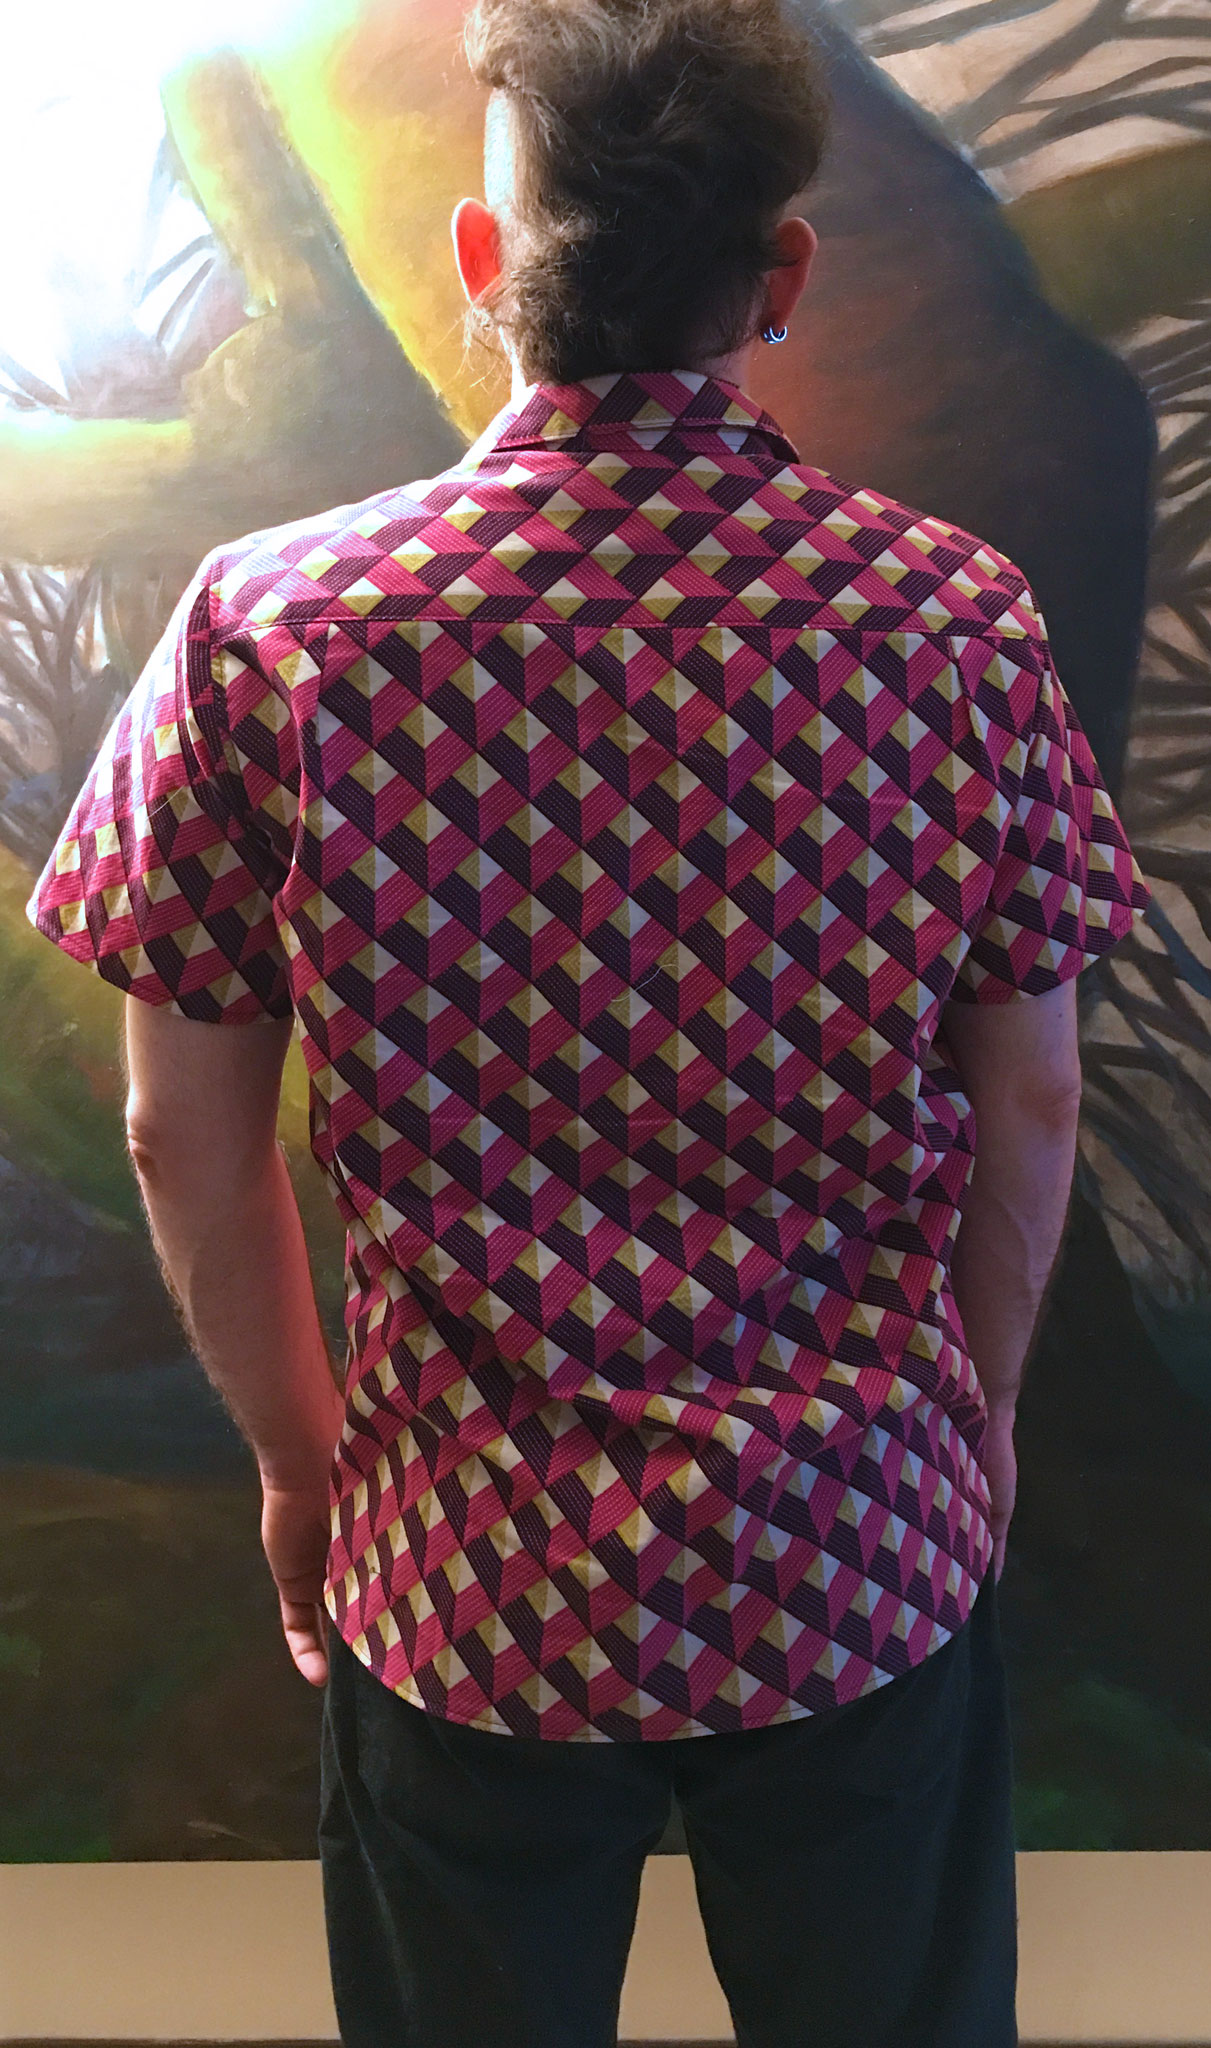 Completed shirt modeled by my husband. Back view.